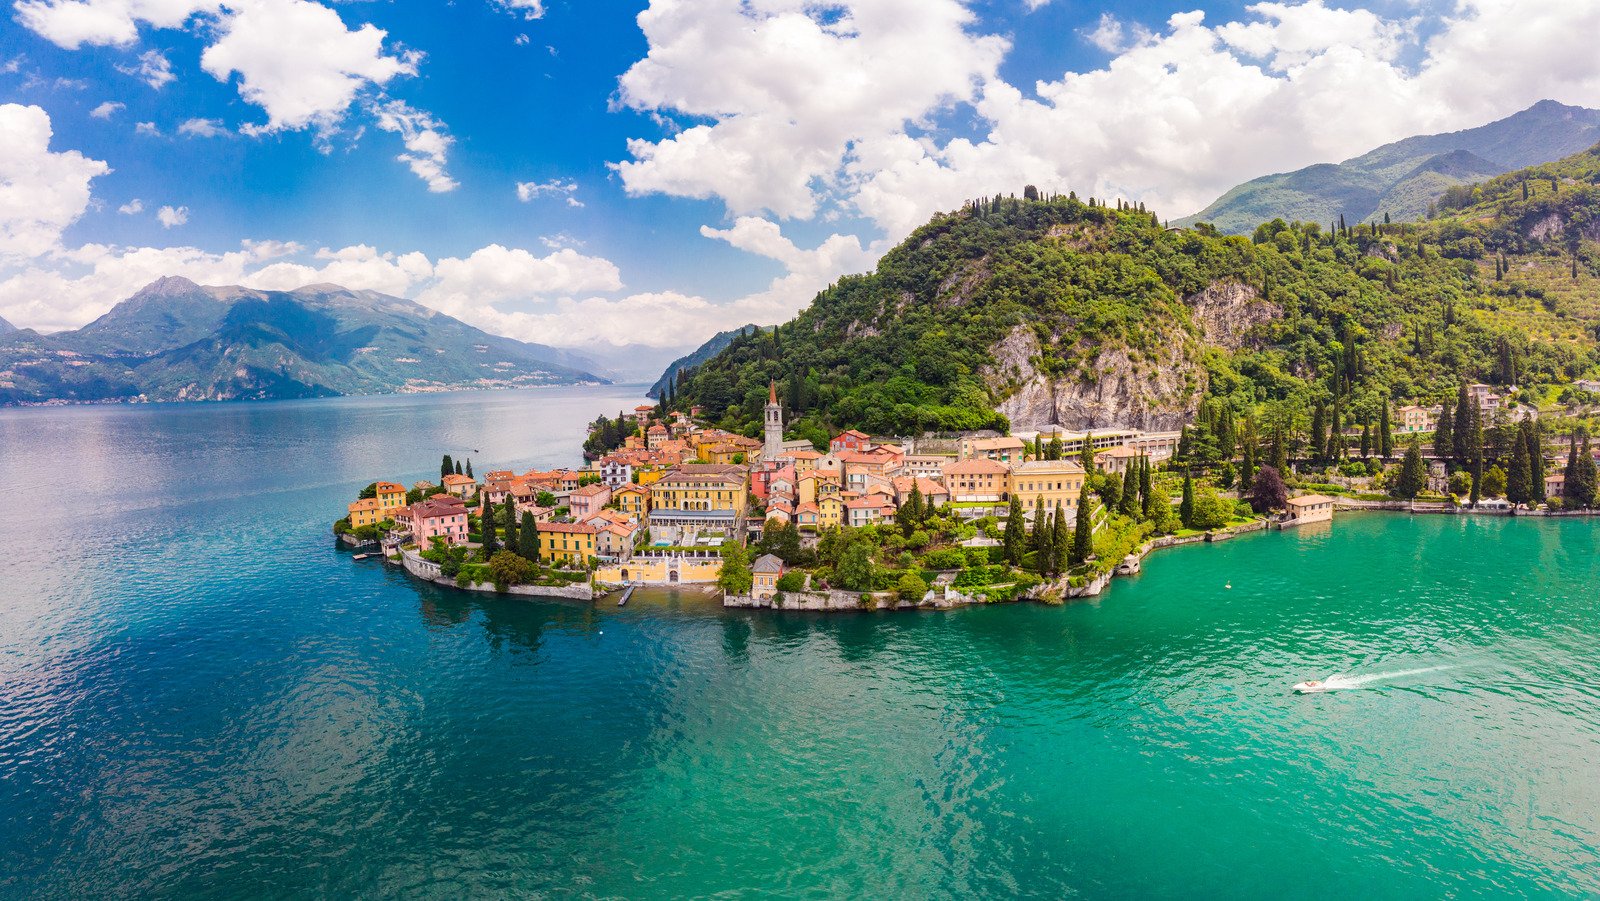 This Private Boat Tour Is The Perfect Way To Explore Italy's Lake Como